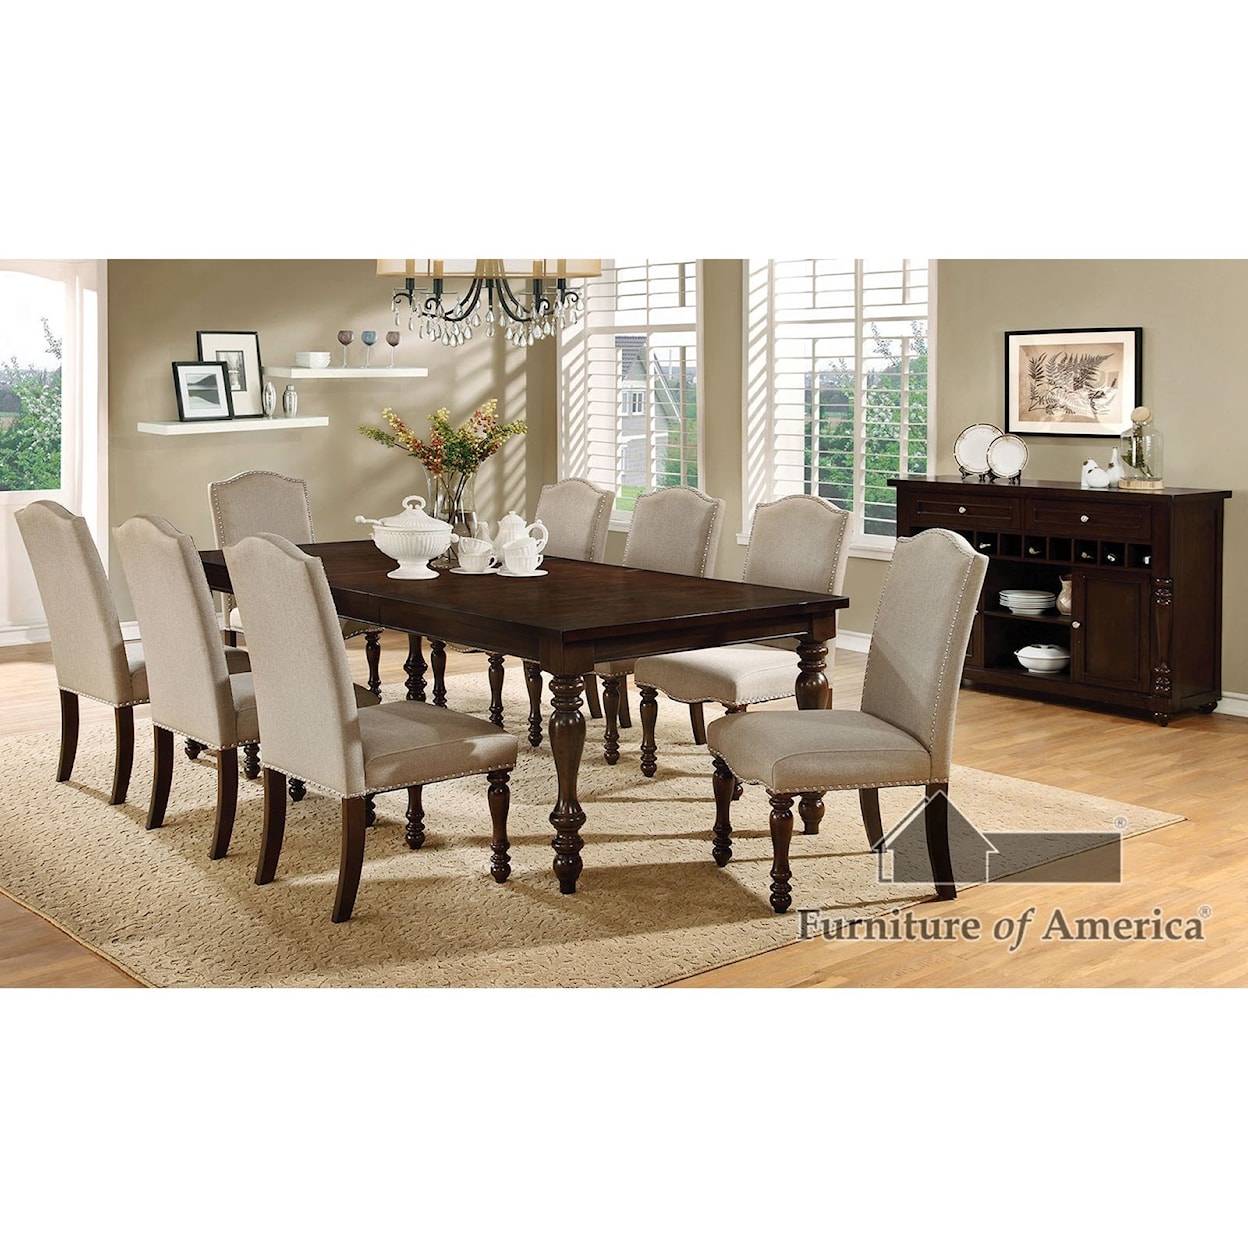 Furniture of America Holcroft Table + 4 Side Chairs + Bench